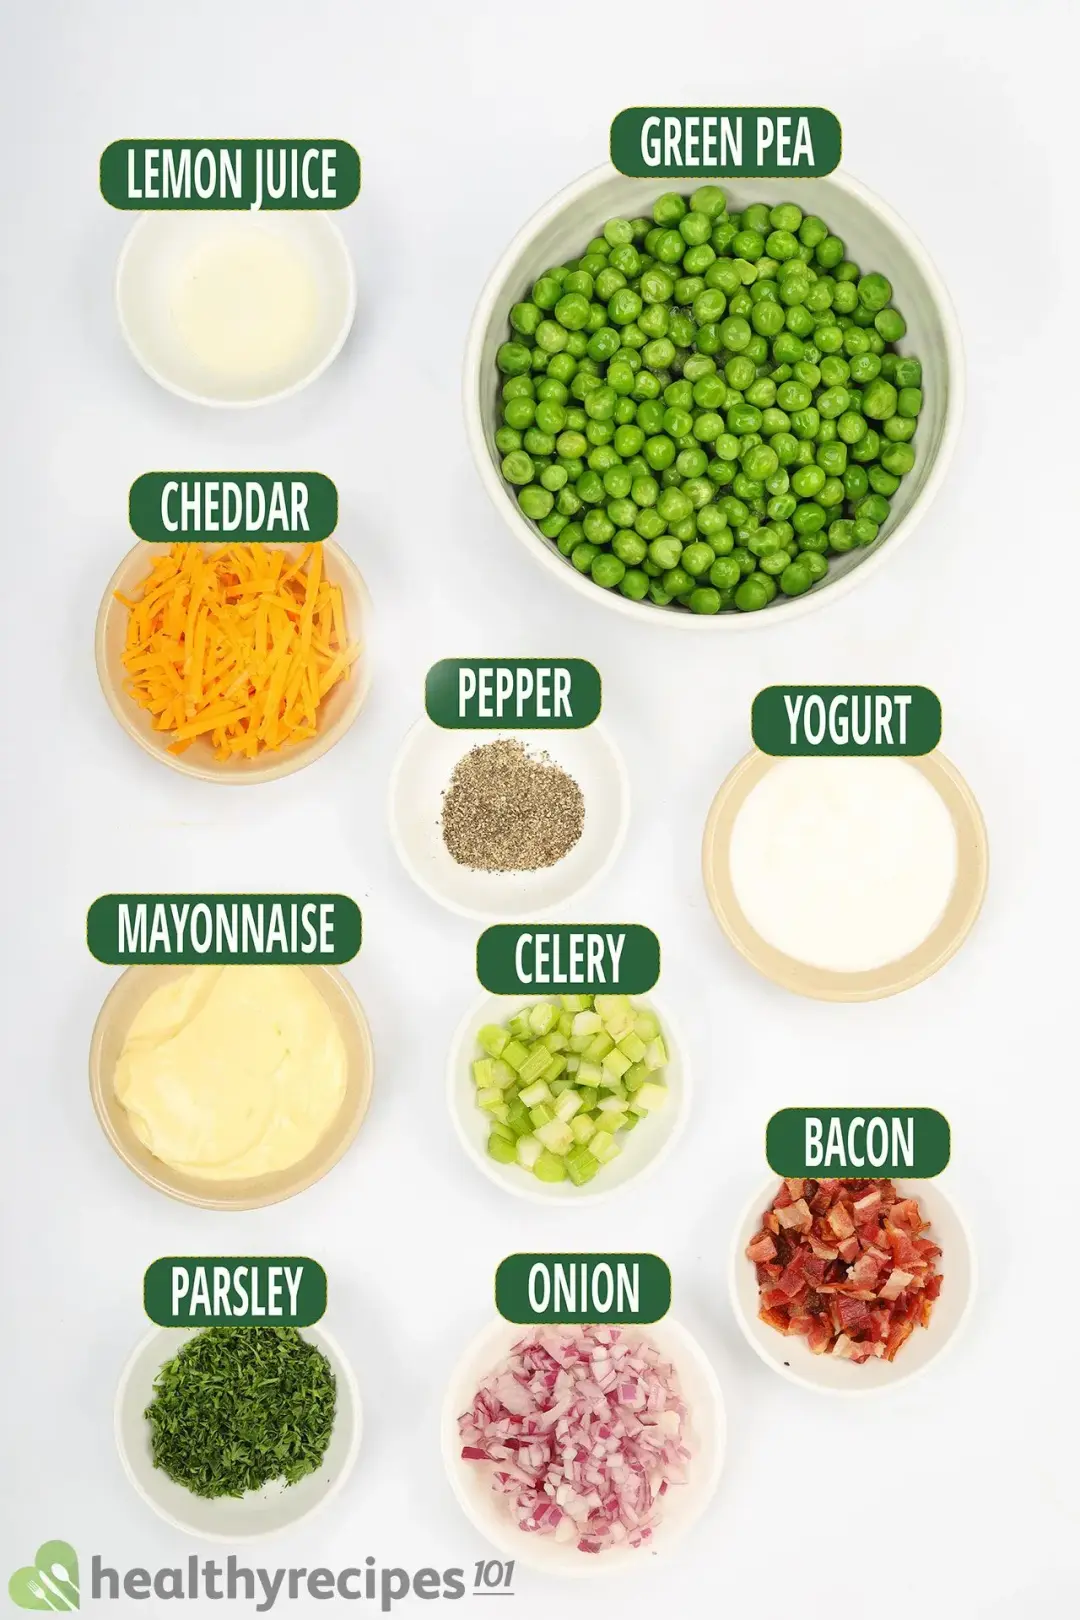 ingredients for green pea salad